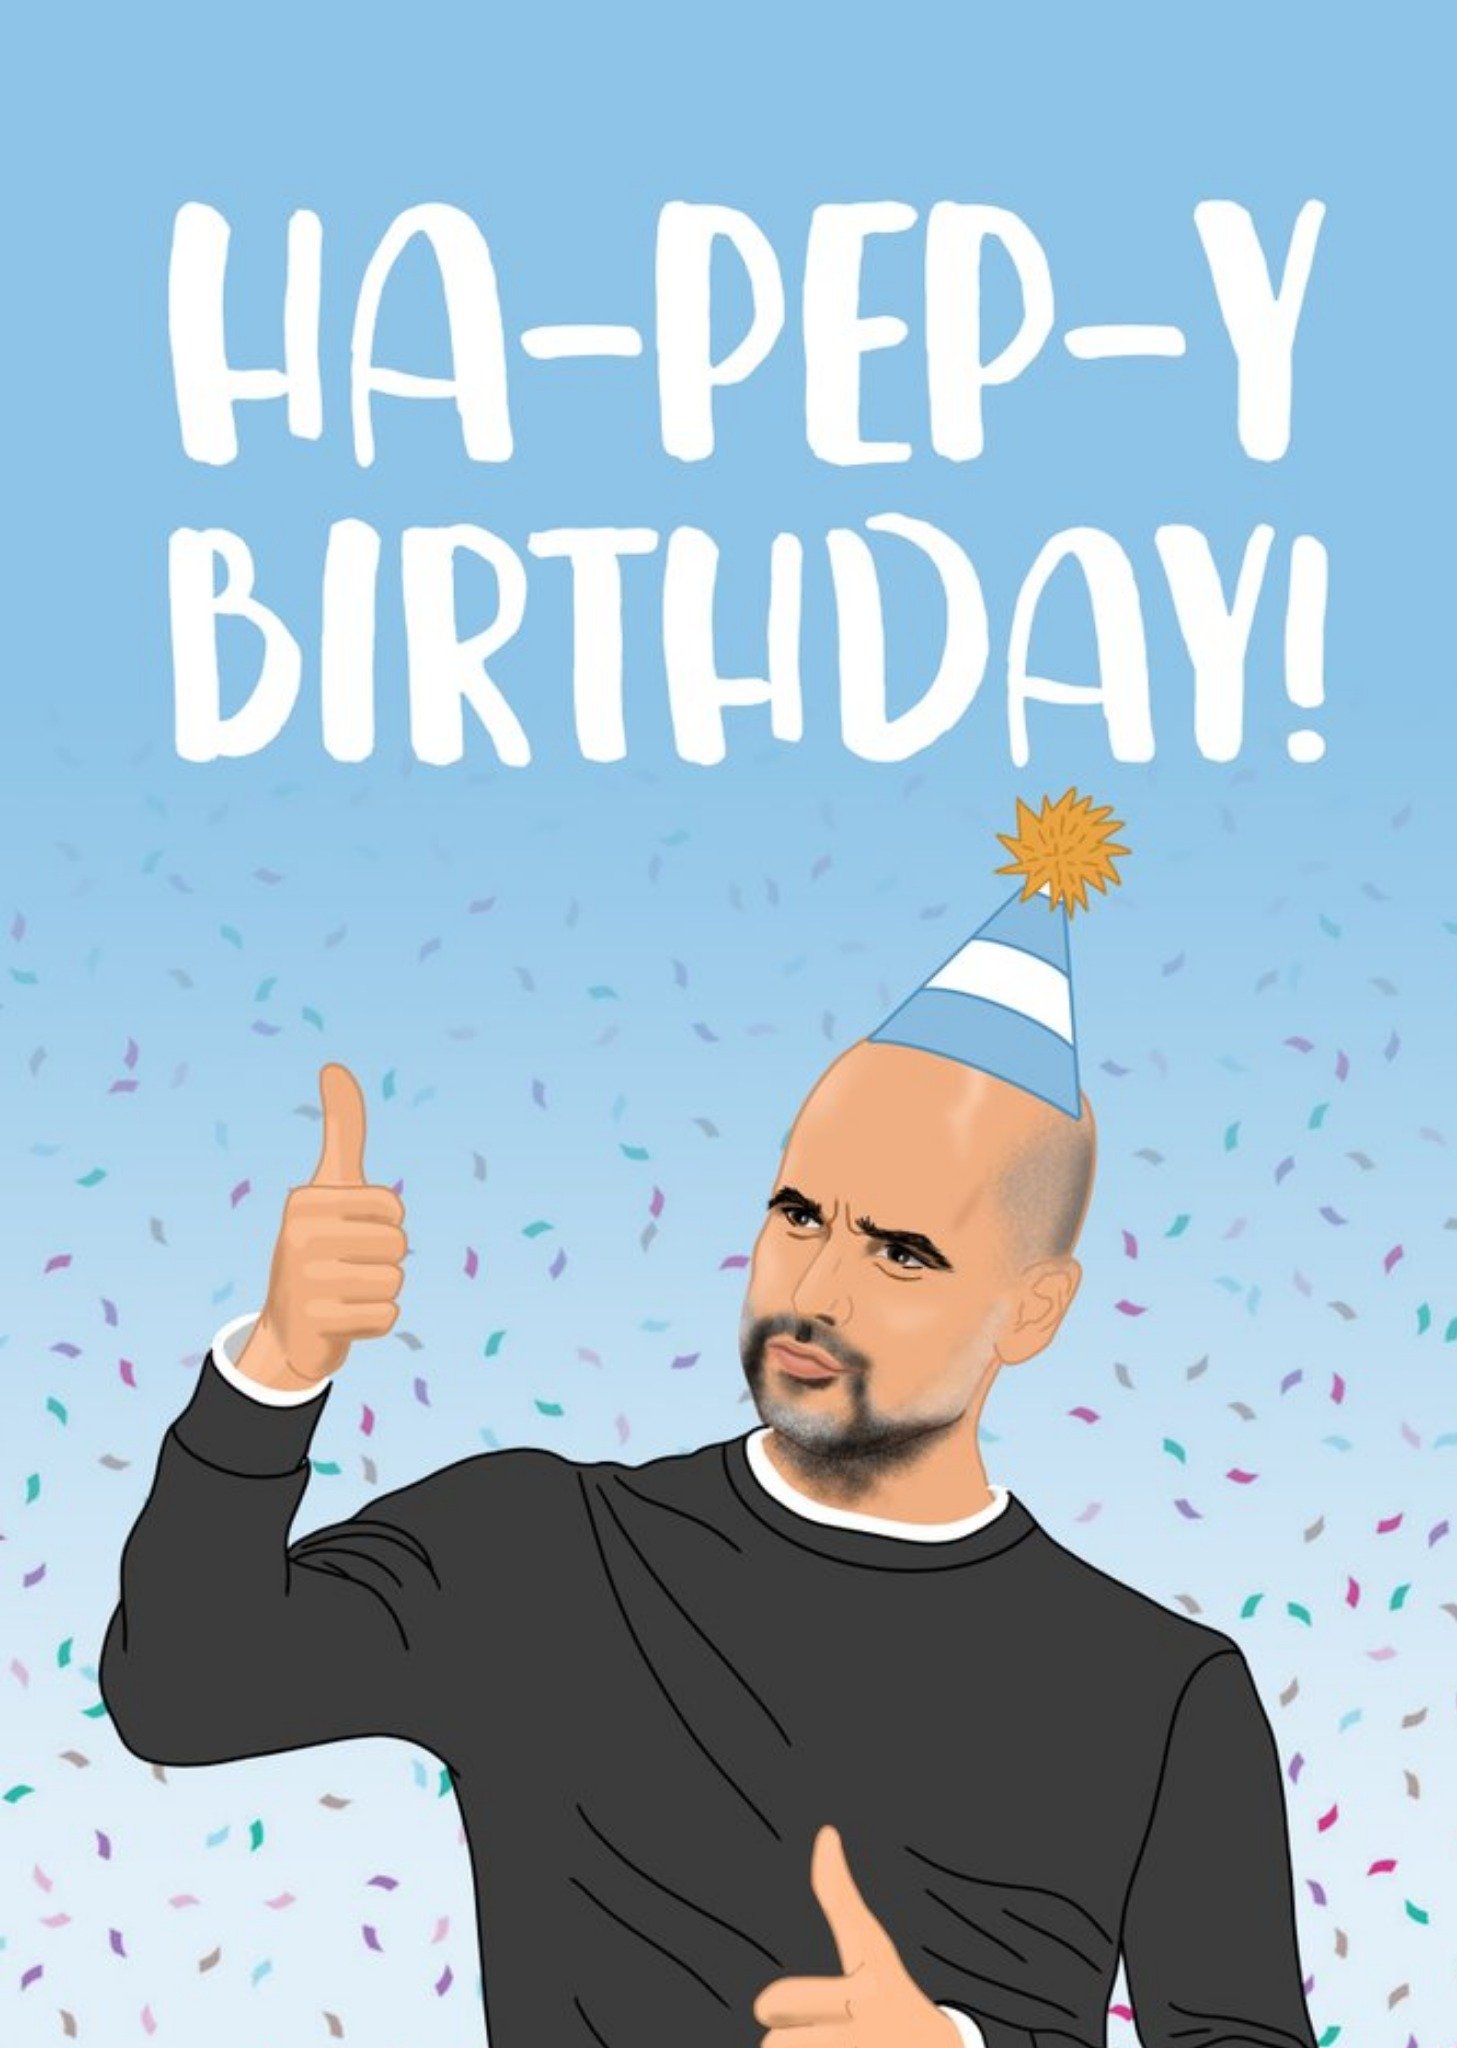 Moonpig Bright Graphic Illustration Of A Premier League Football Manager Ha-Pep-Y Birthday Card, Lar